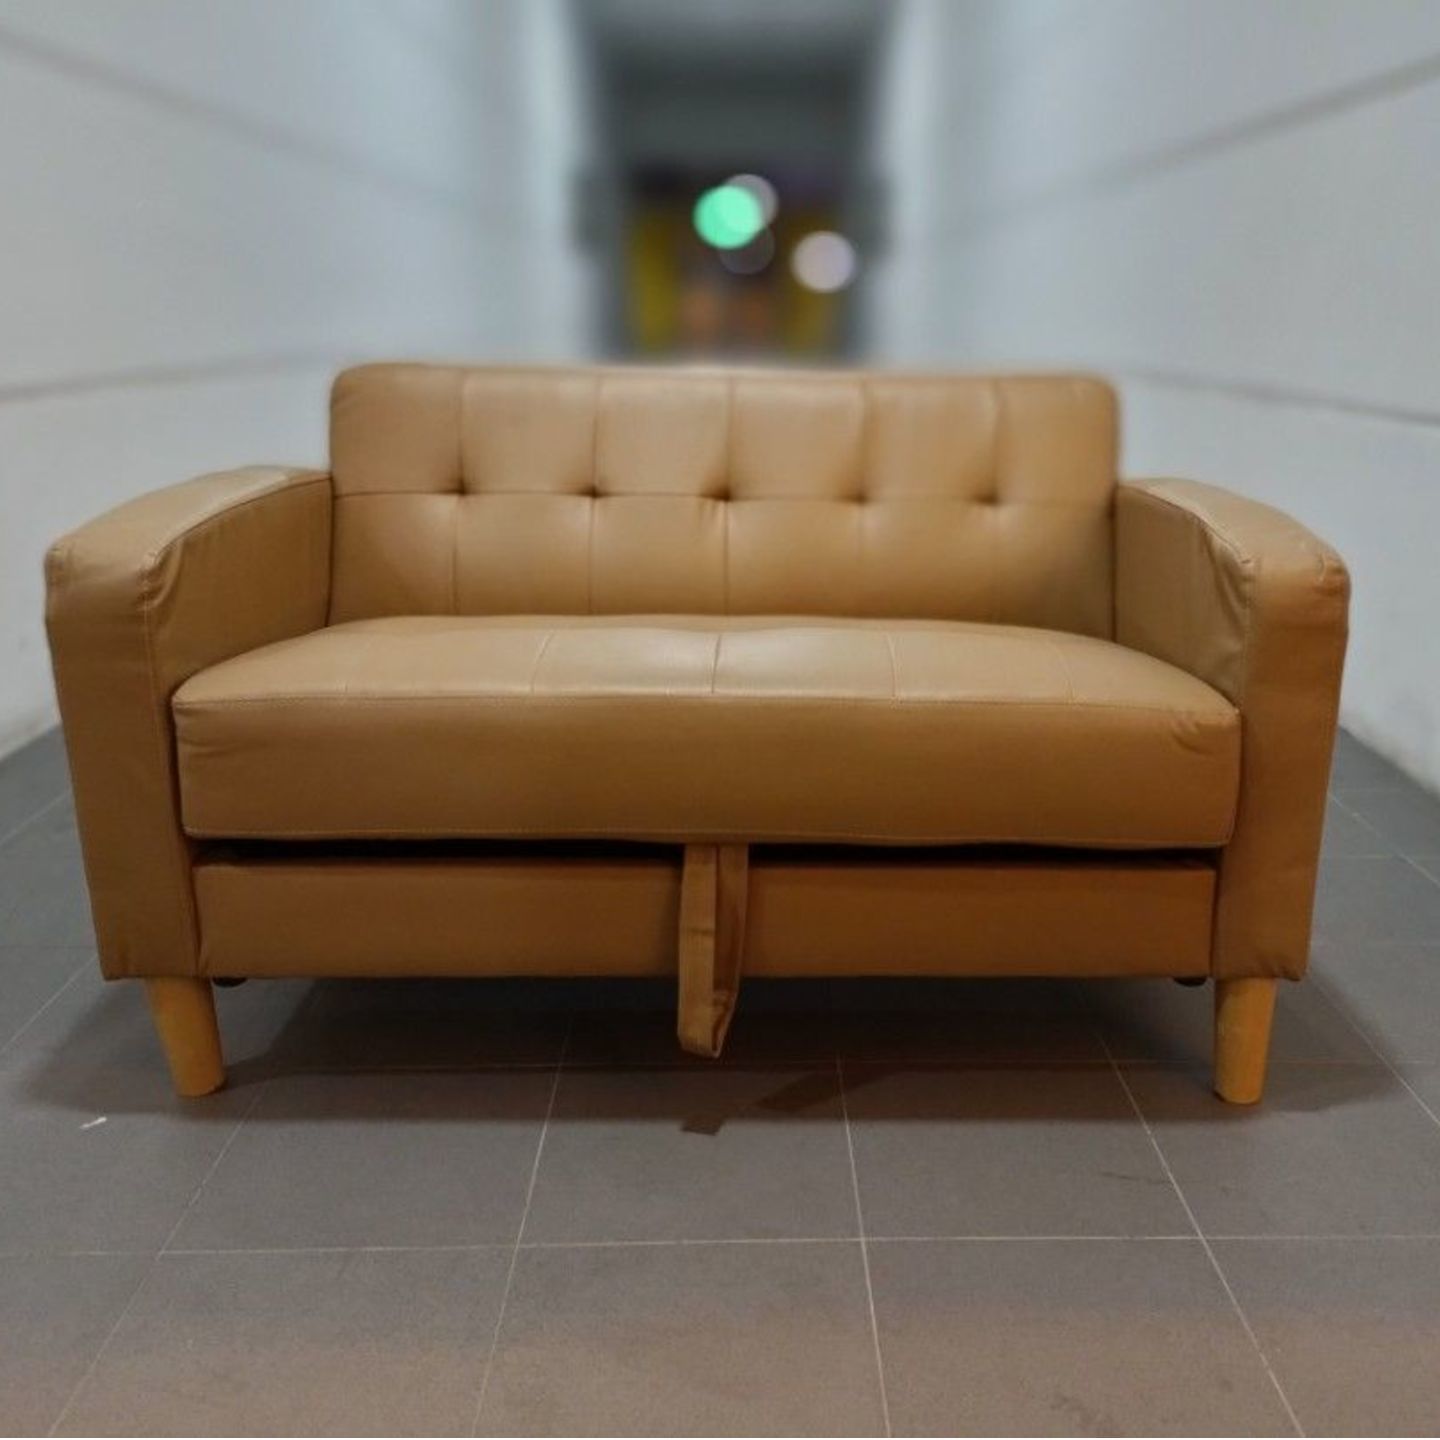 HSV 2 Seater Sofa with Storage in CHAMPAGNE PVC